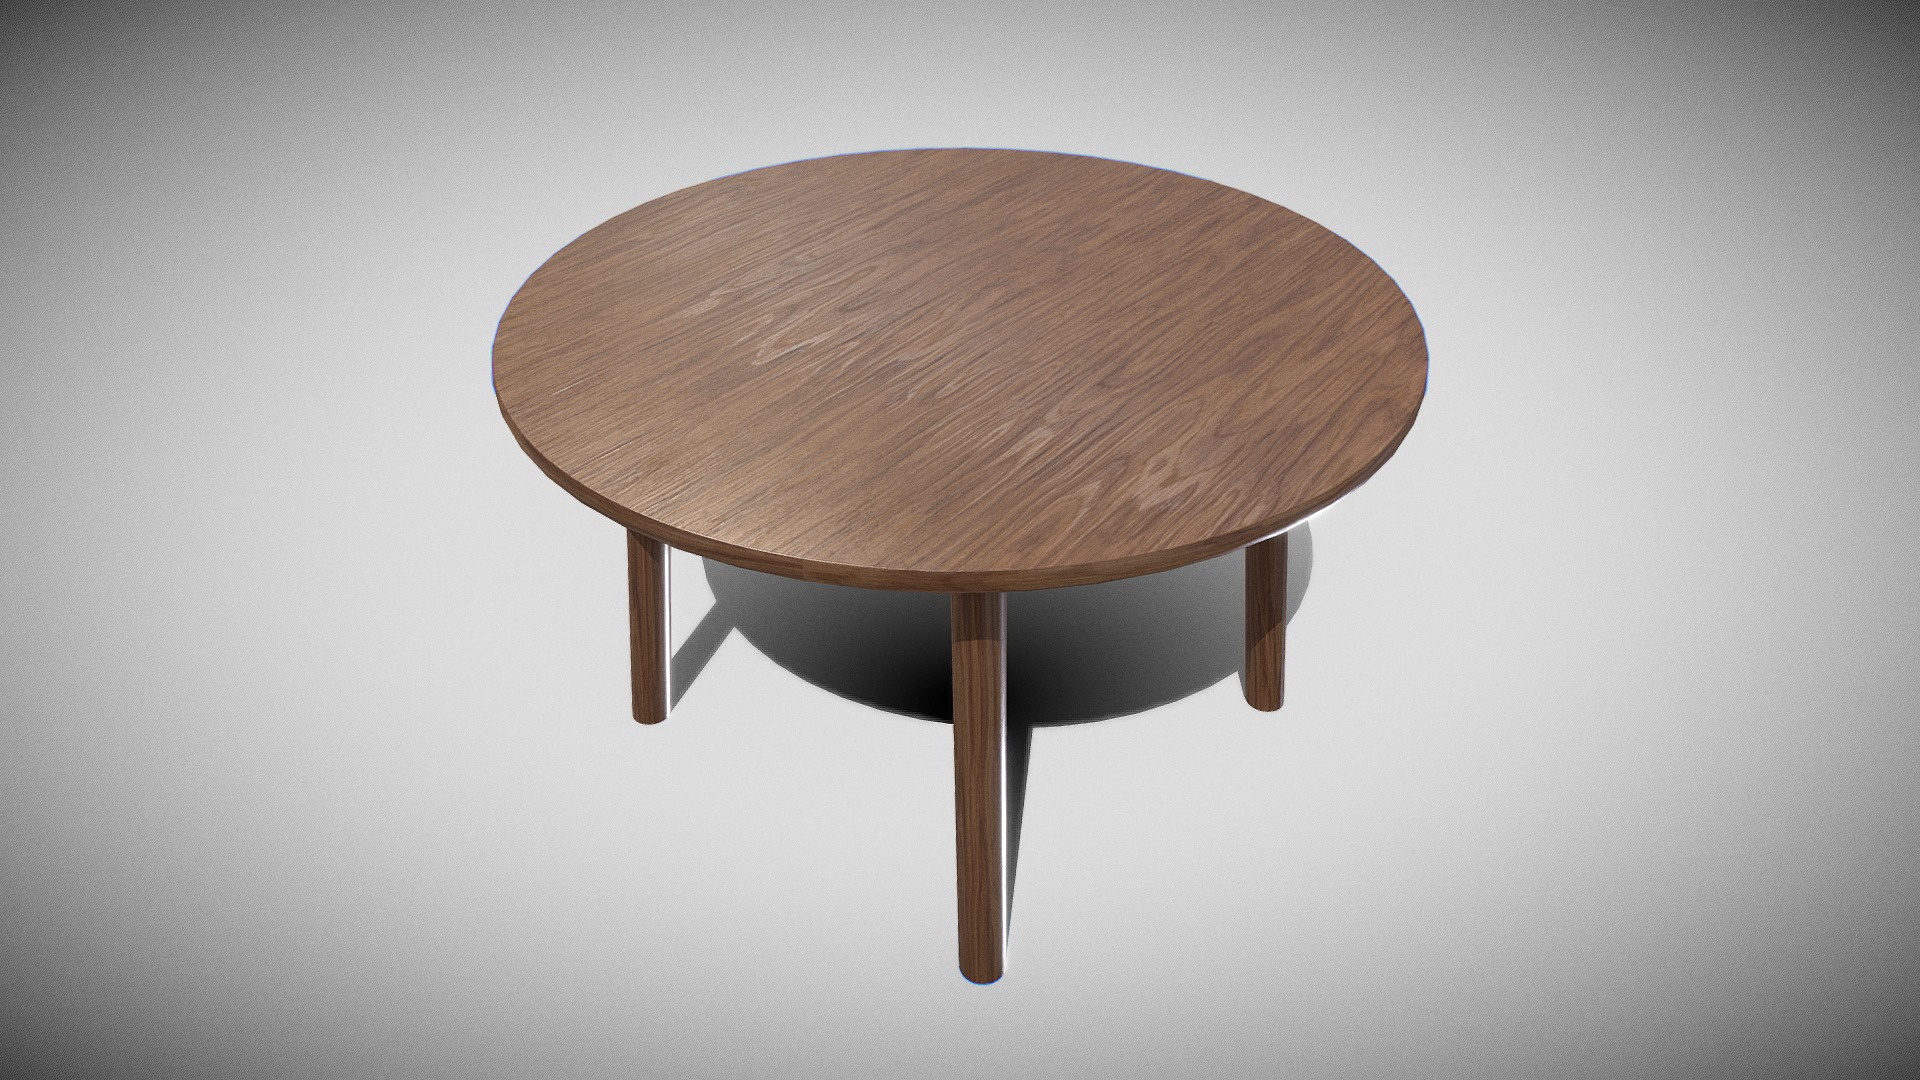 3D model TARO TABLE 6121-oak smoked oiled - This is a 3D model of the TARO TABLE 6121-oak smoked oiled. The 3D model is about a wooden table with a stool.